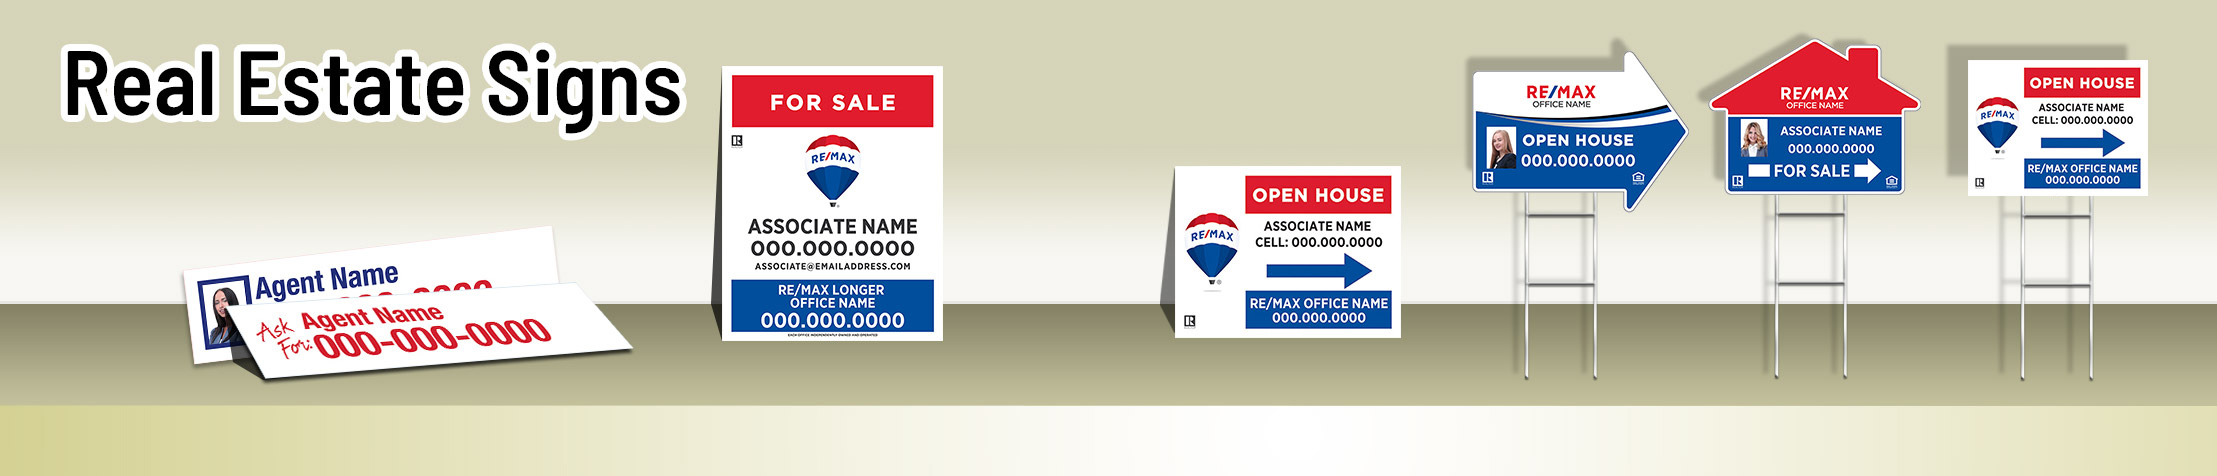 REMAX Real Estate Signs - REMAX real estate signs - H-Frame Units, Directional Signs, A-Frame Units, Yard Post and Panel | Sparkprint.com